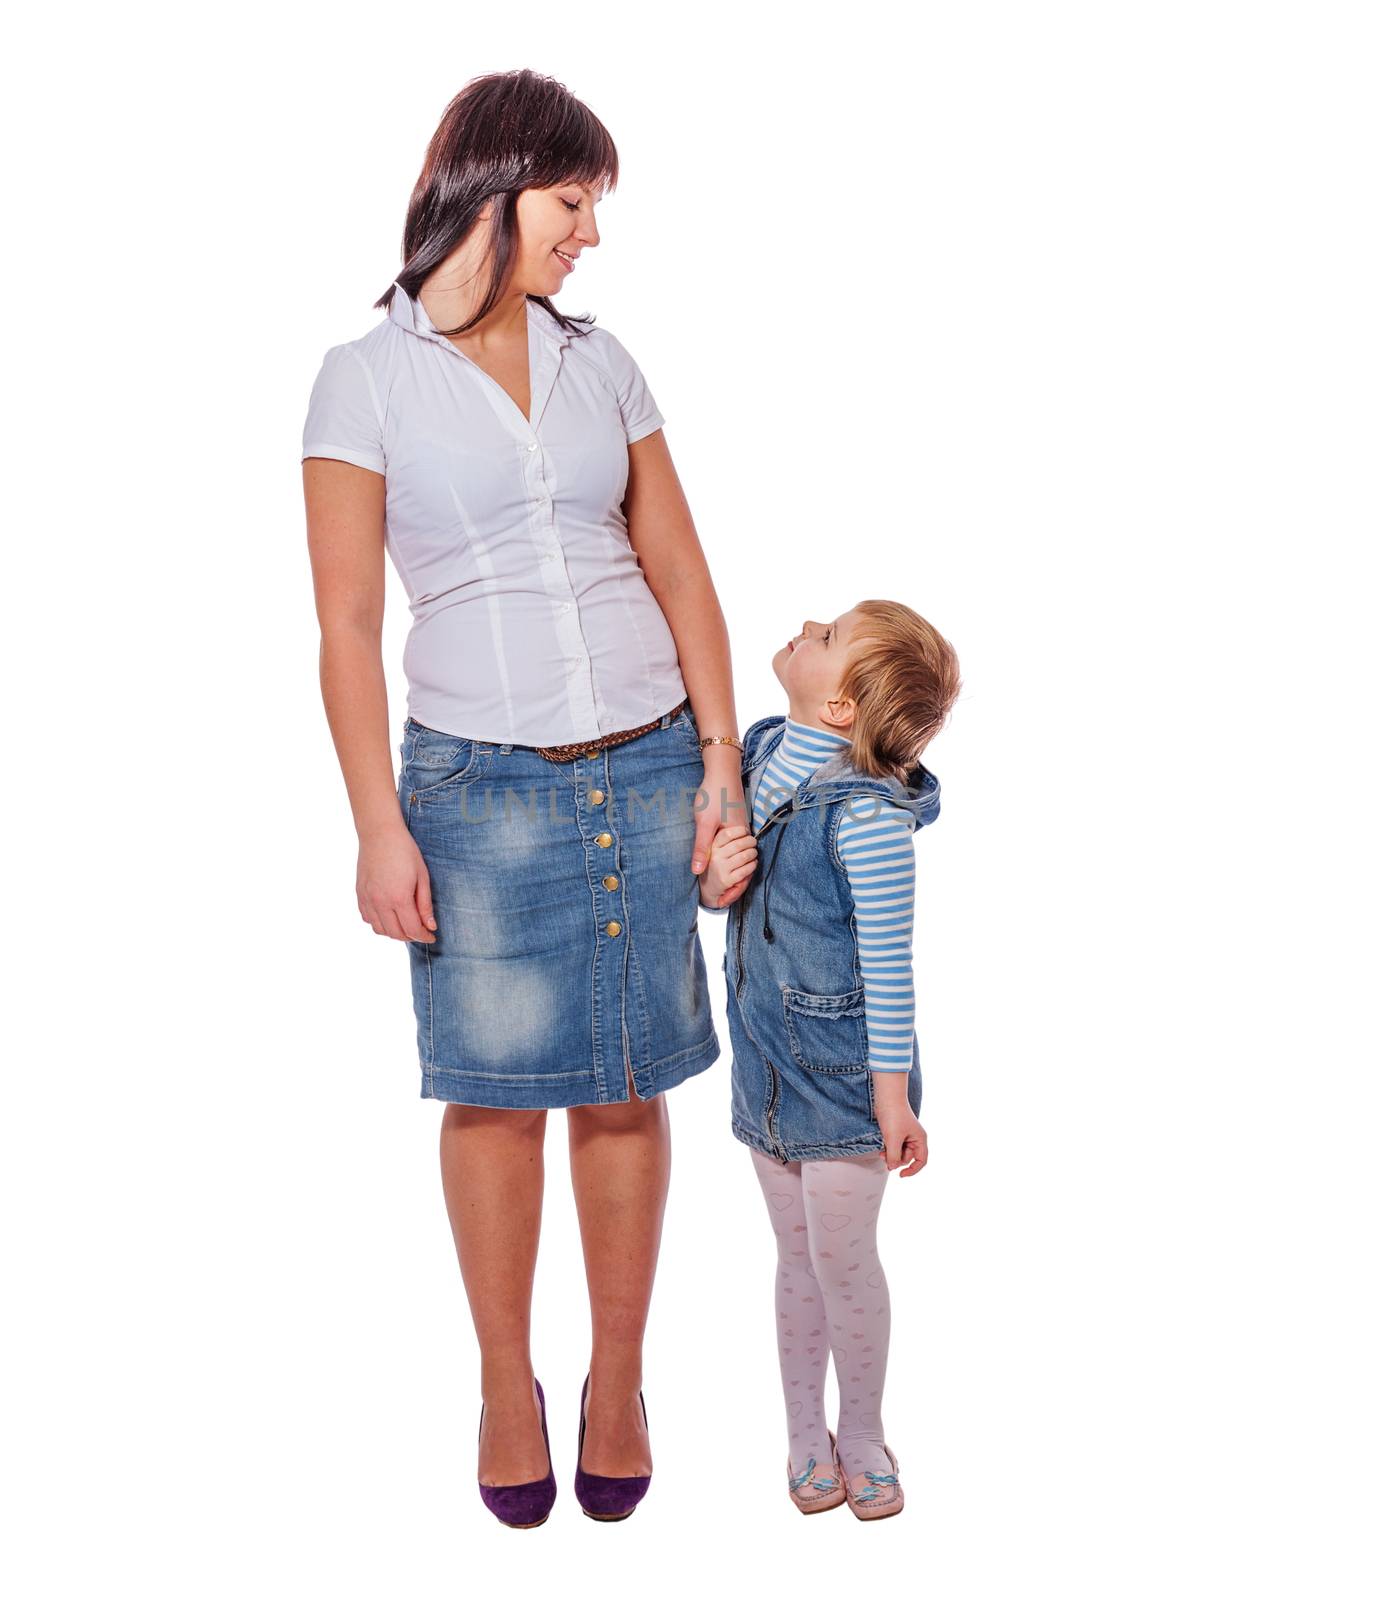 Mother and daughter smiling standing together isolated